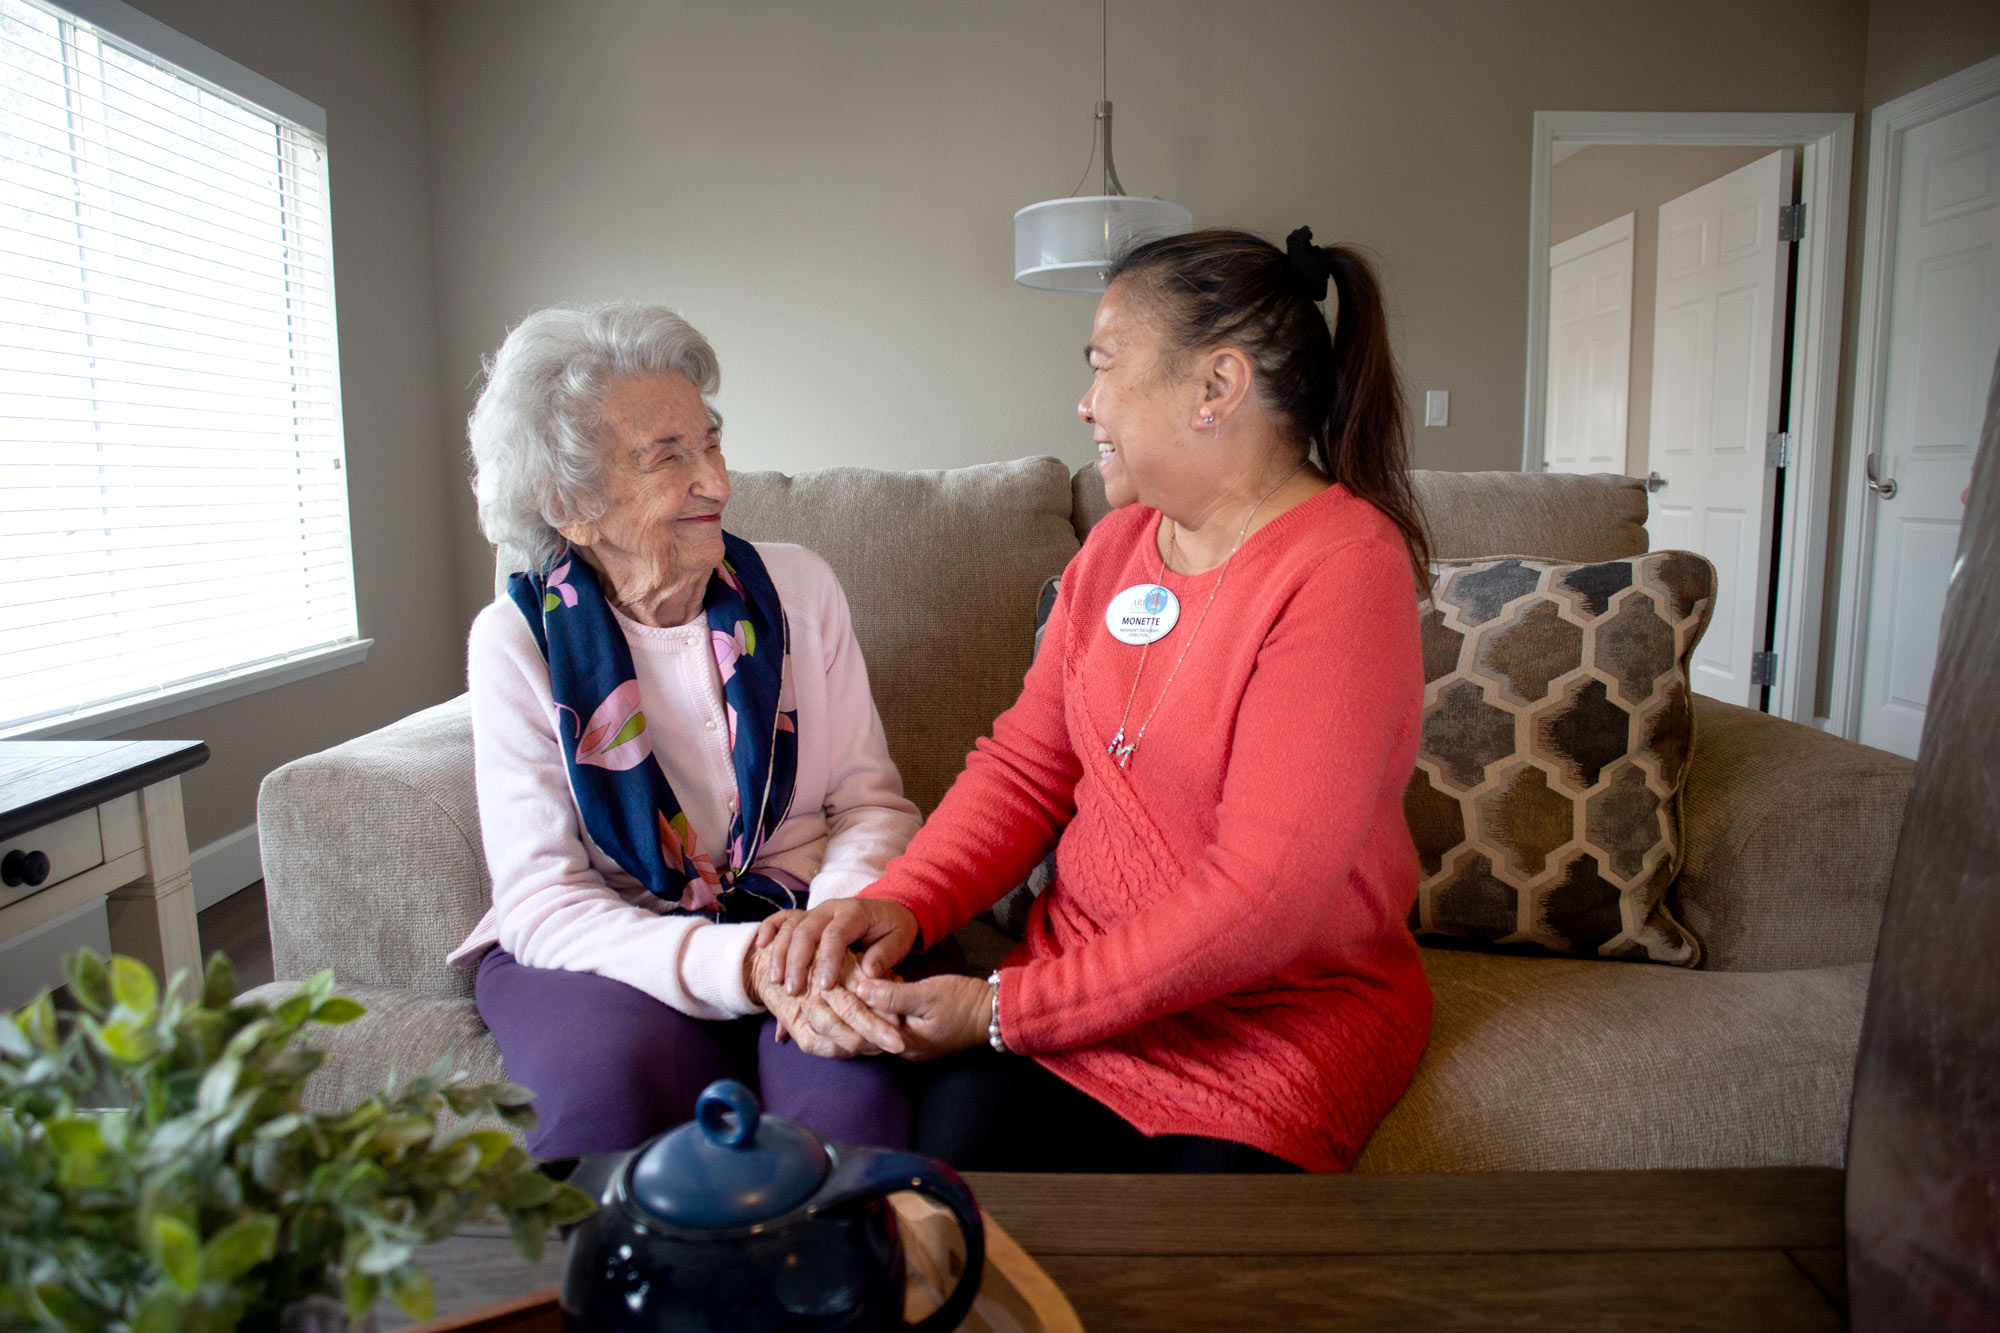 resident speaking with nurse